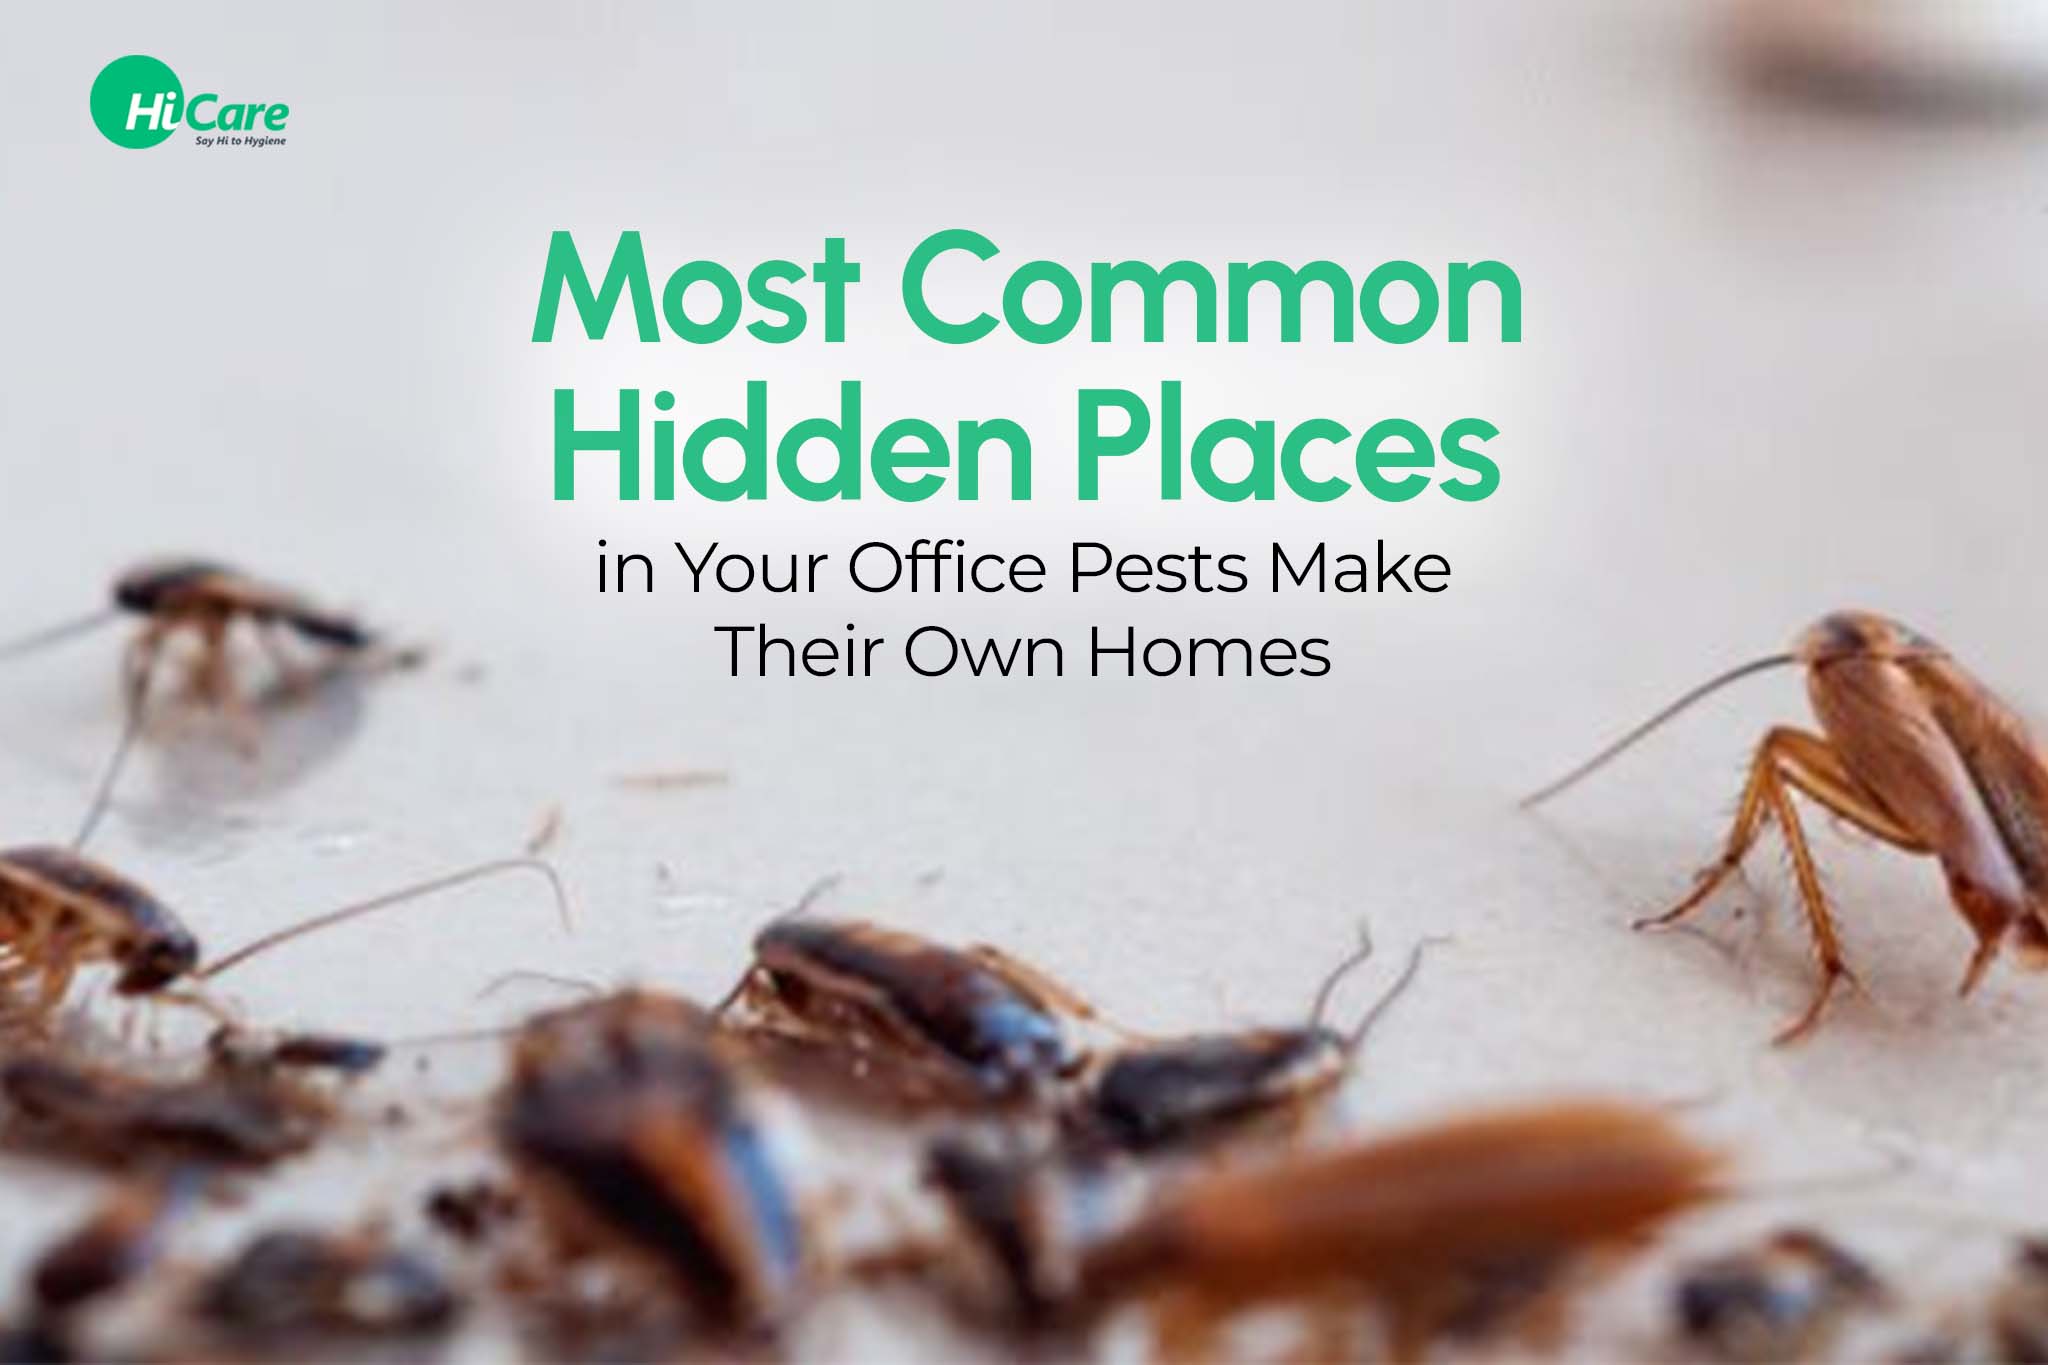 7 Most Common Hidden Places in Your Office Pests Make Their Own Homes